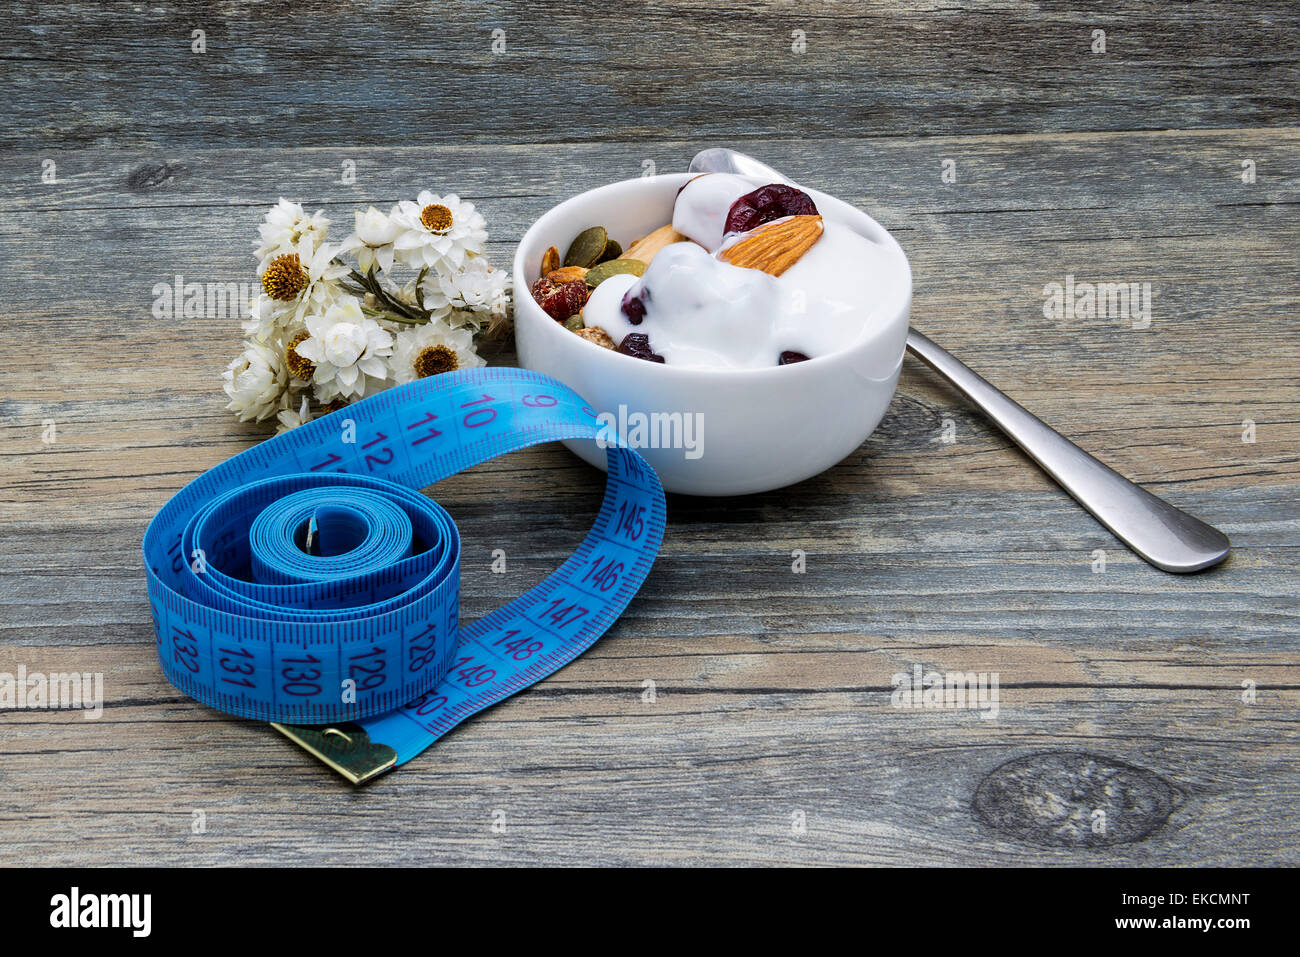 Diet breakfast with granola and yogurt on rustic wooden background. Stock Photo